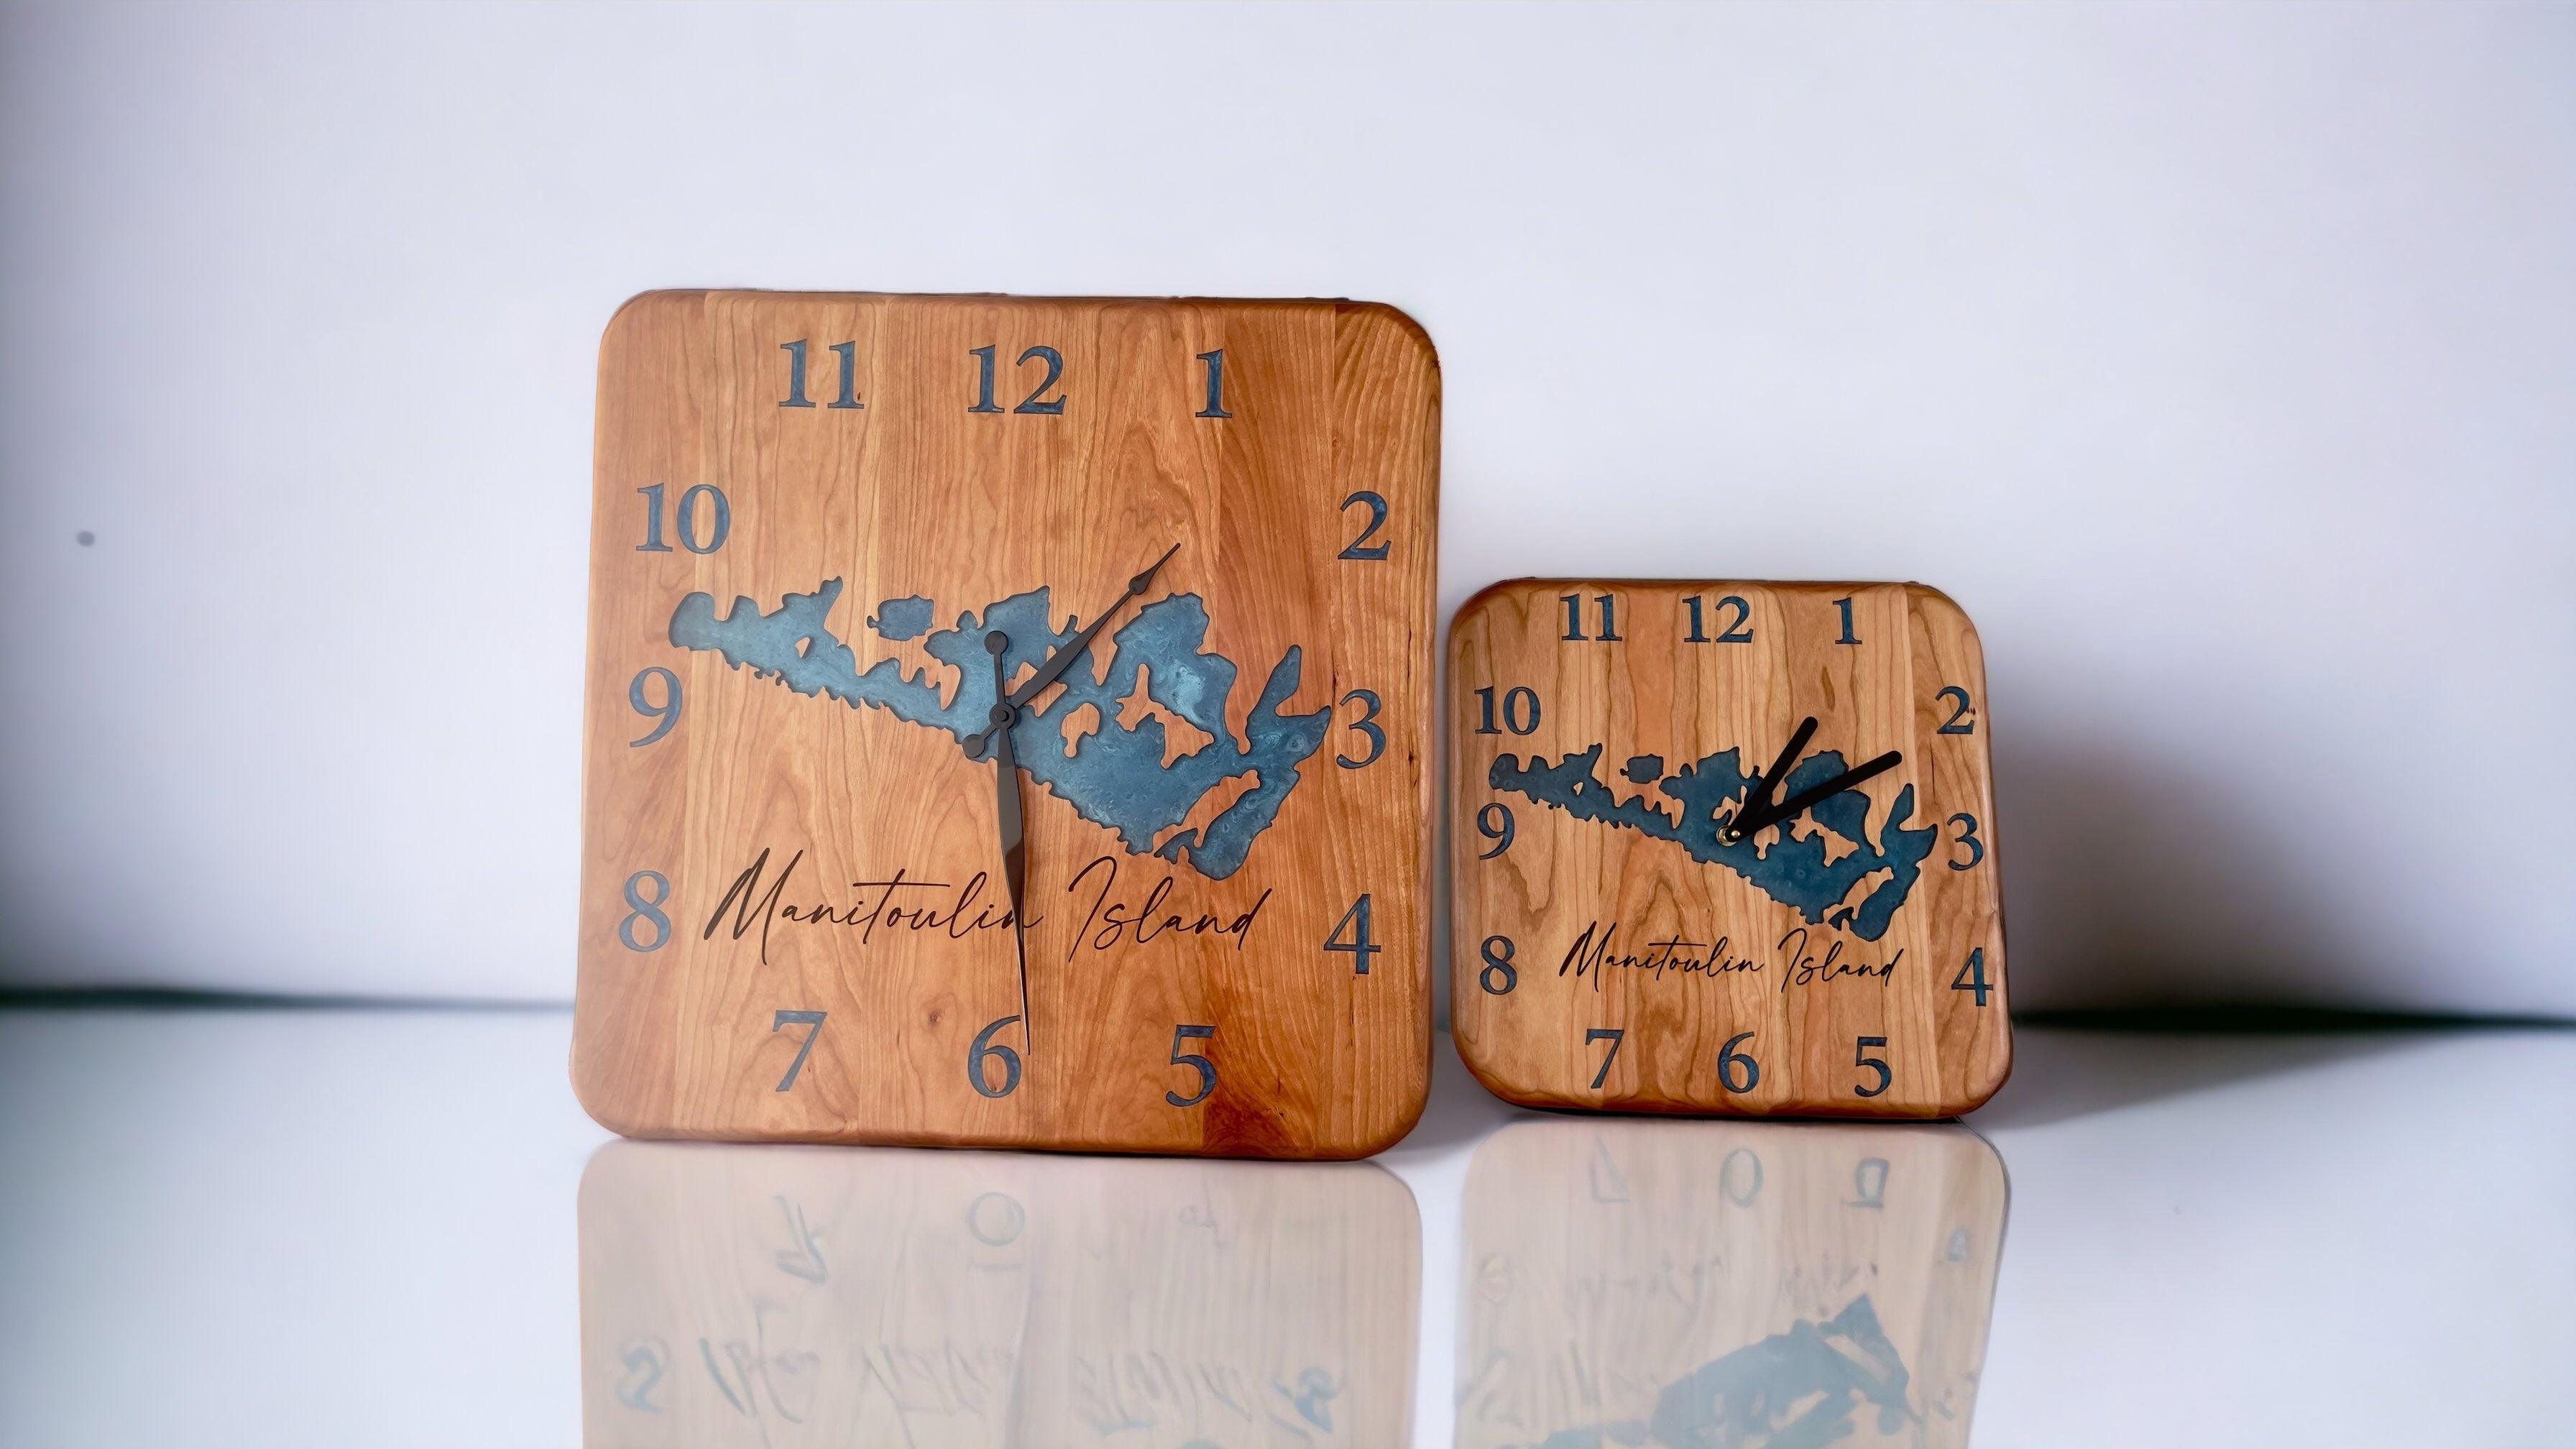 Manitoulin clock - We have the wood